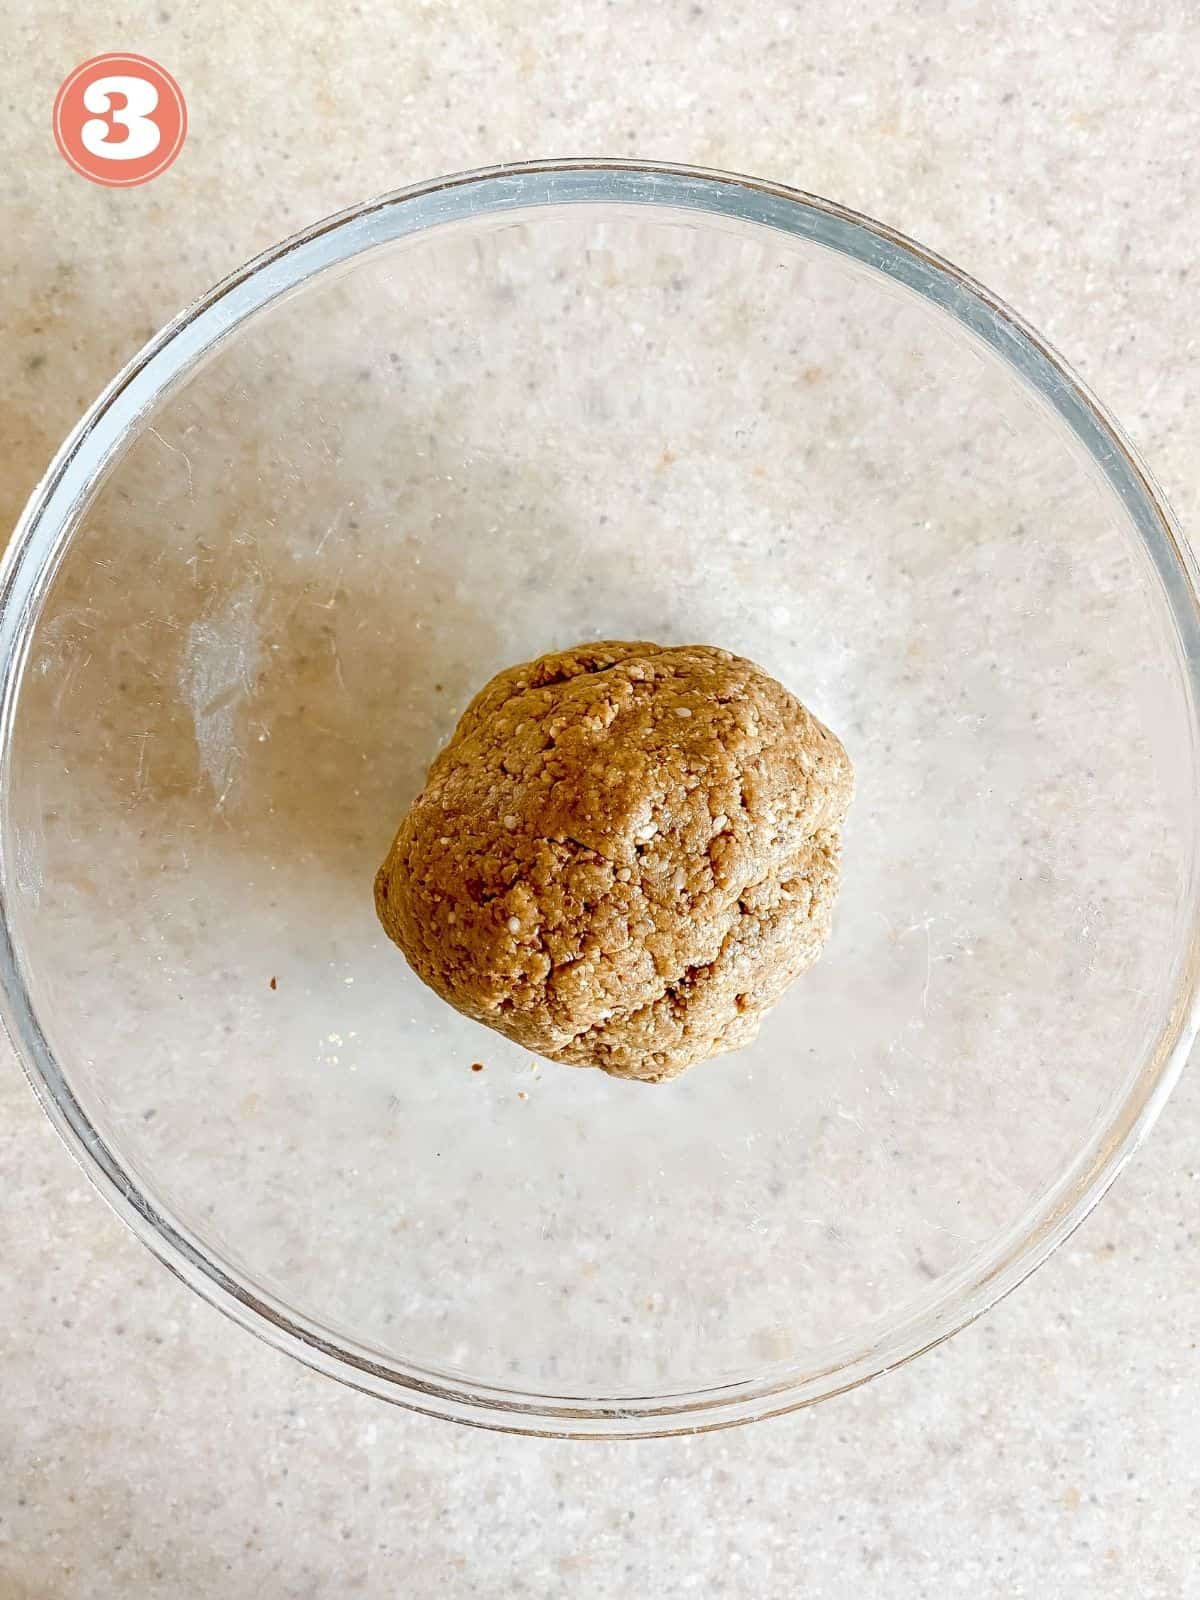 ball of energy ball dough in a glass bowl labelled number three.